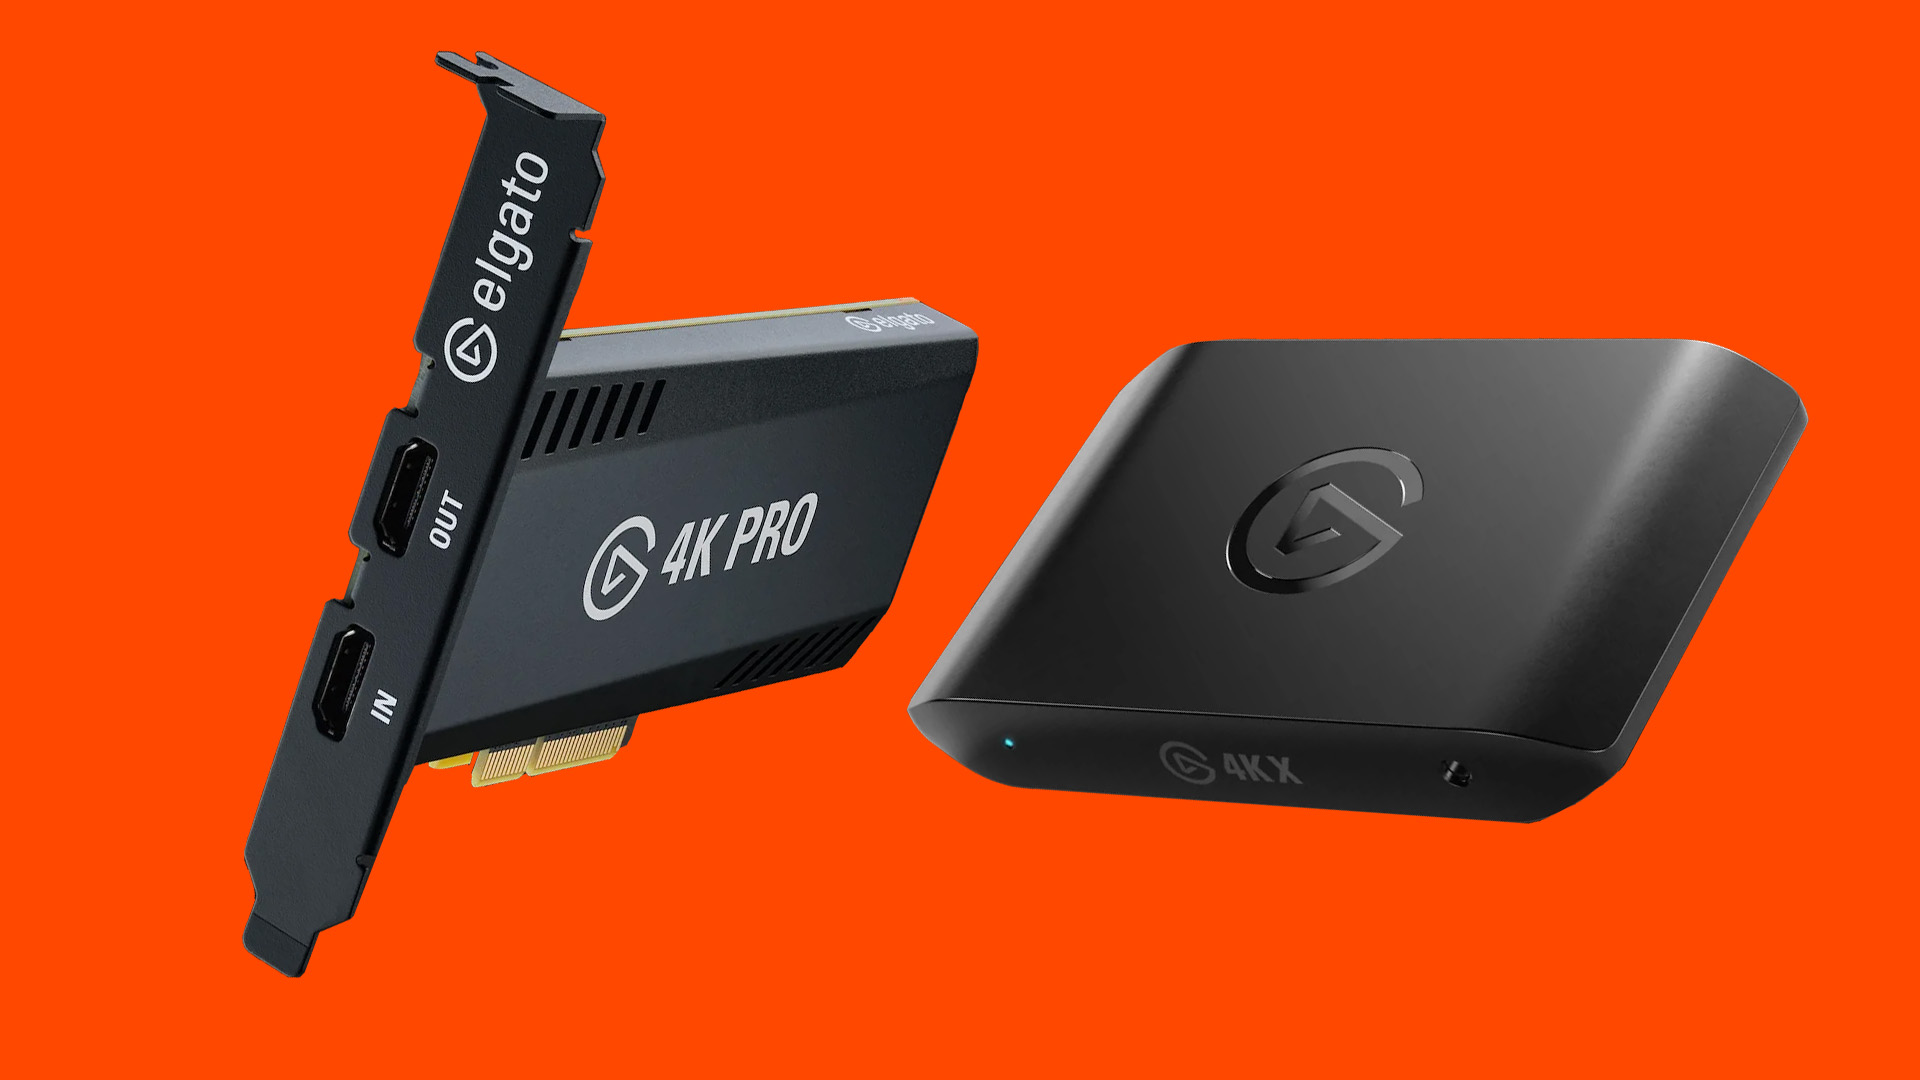 Elgato's new capture cards make high-speed 4K streaming a reality